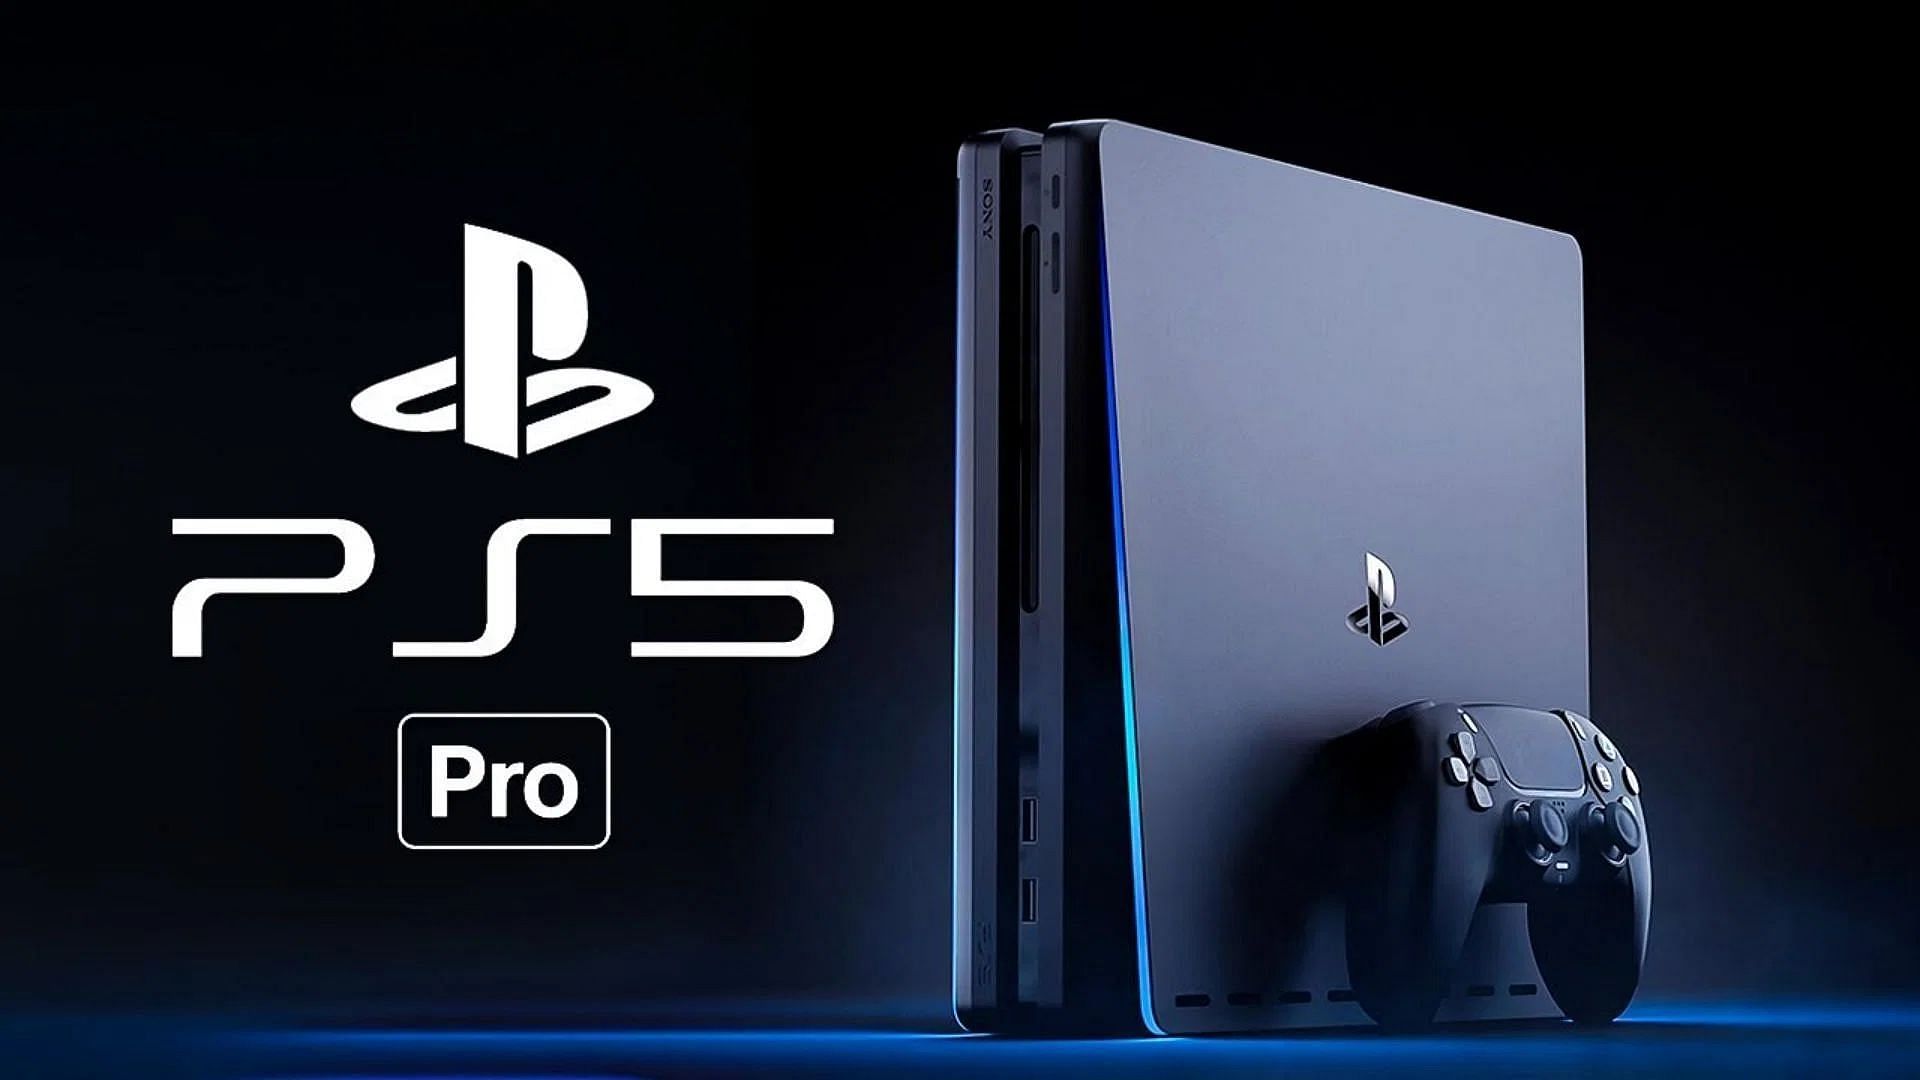 The new PS5 Pro console will bring heightened 4K gaming performance (Image via Techfluencer/YouTube)